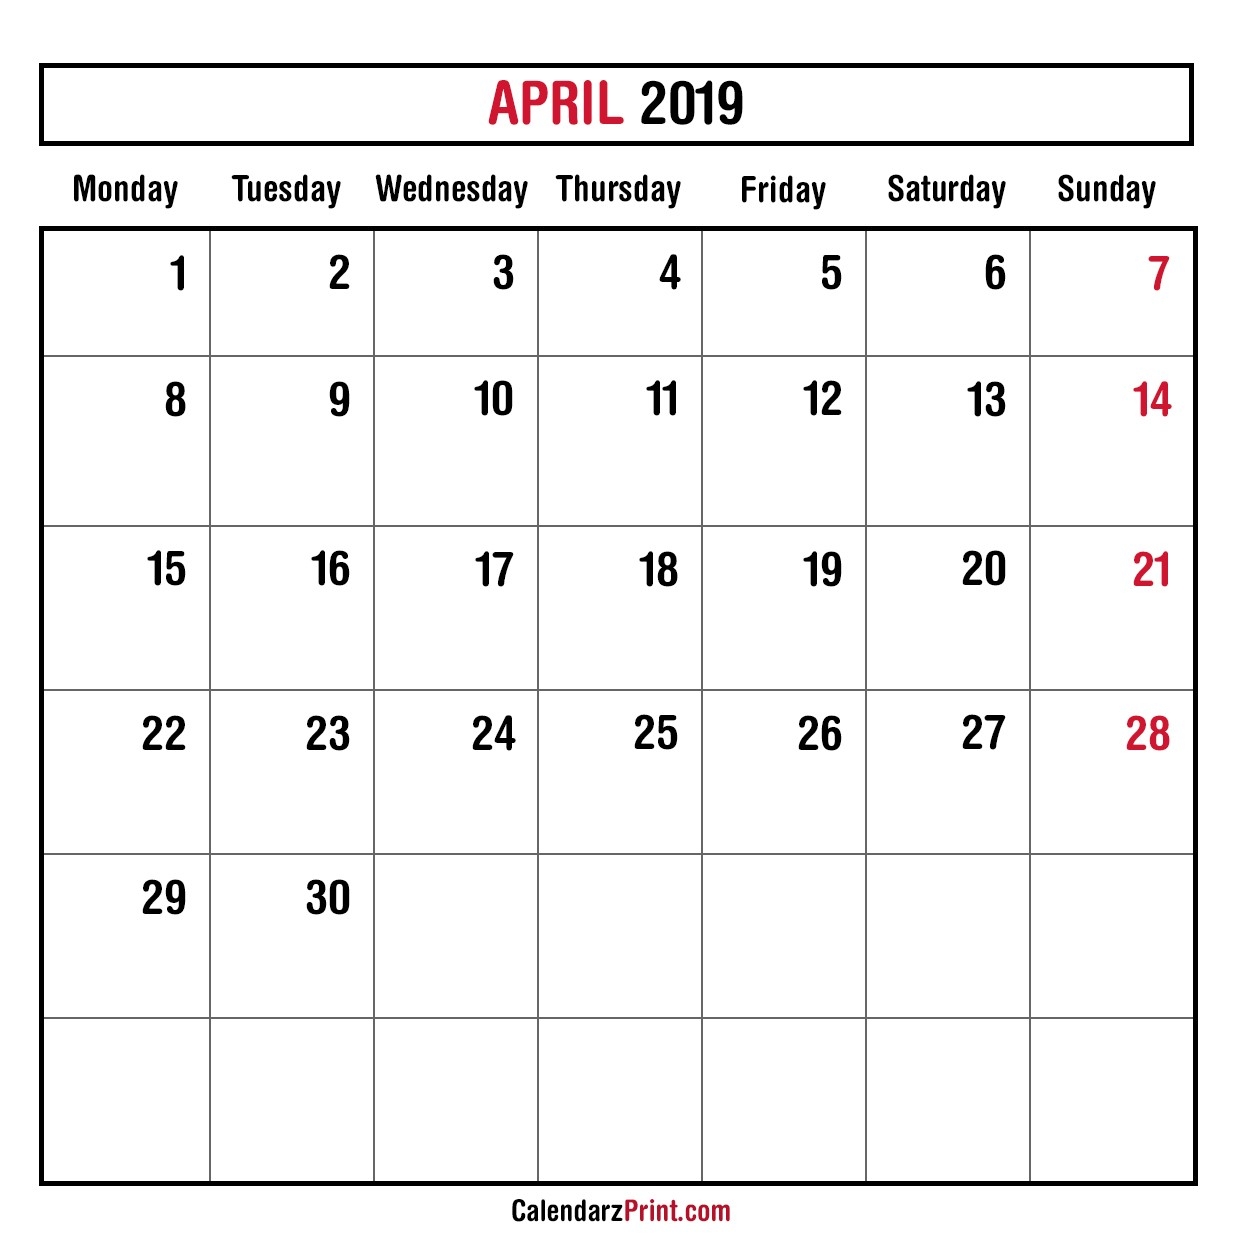 Monthly Planner April 2019 – Printable – Monthly Calendar-Monthly Calendar Starts On Monday